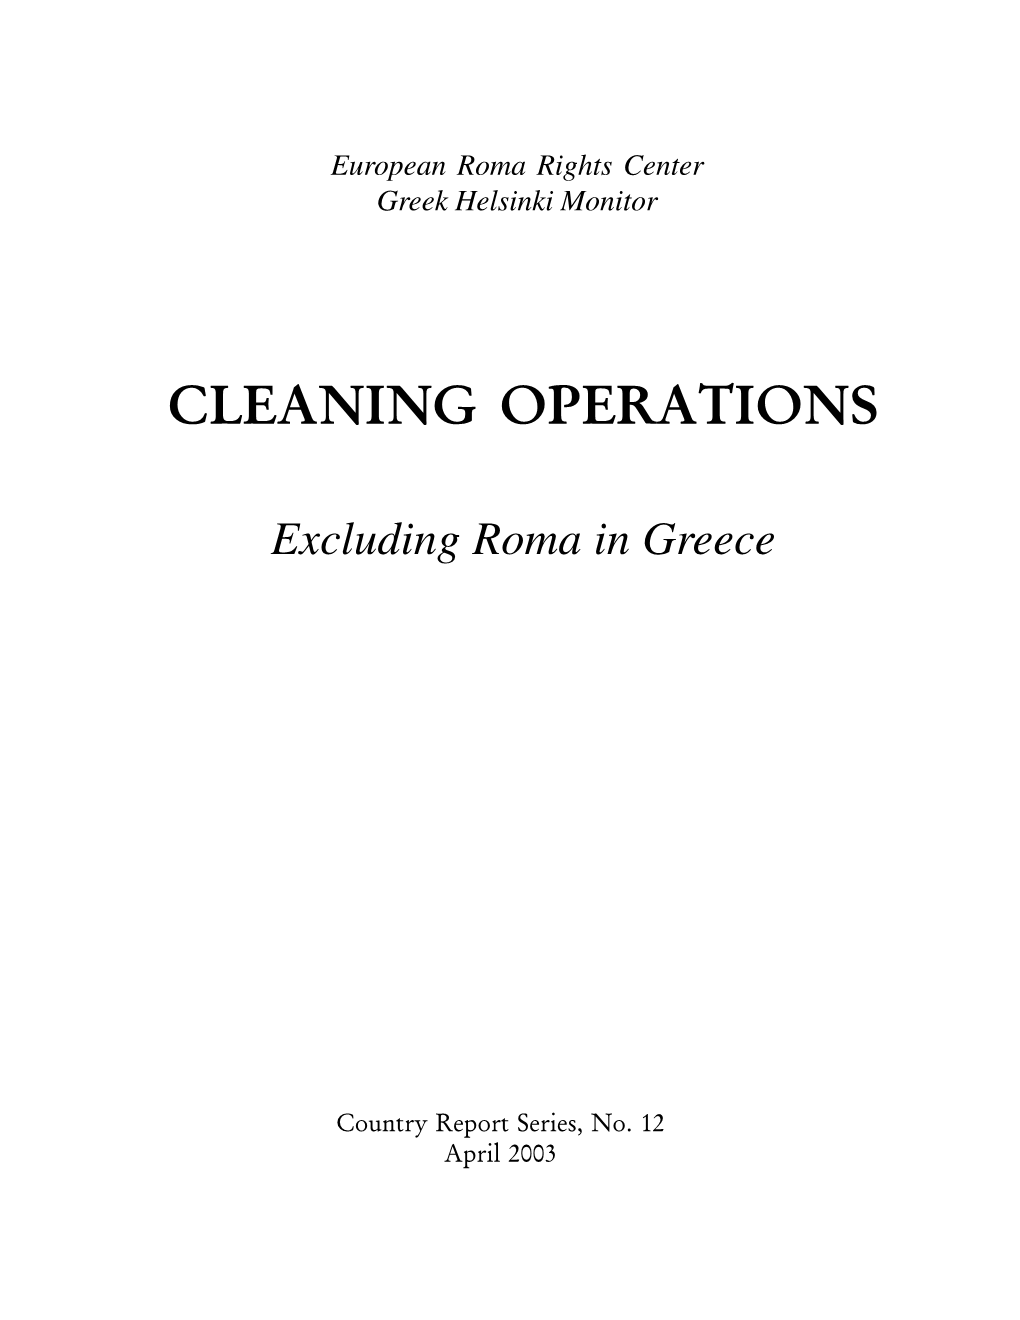 Cleaning Operations